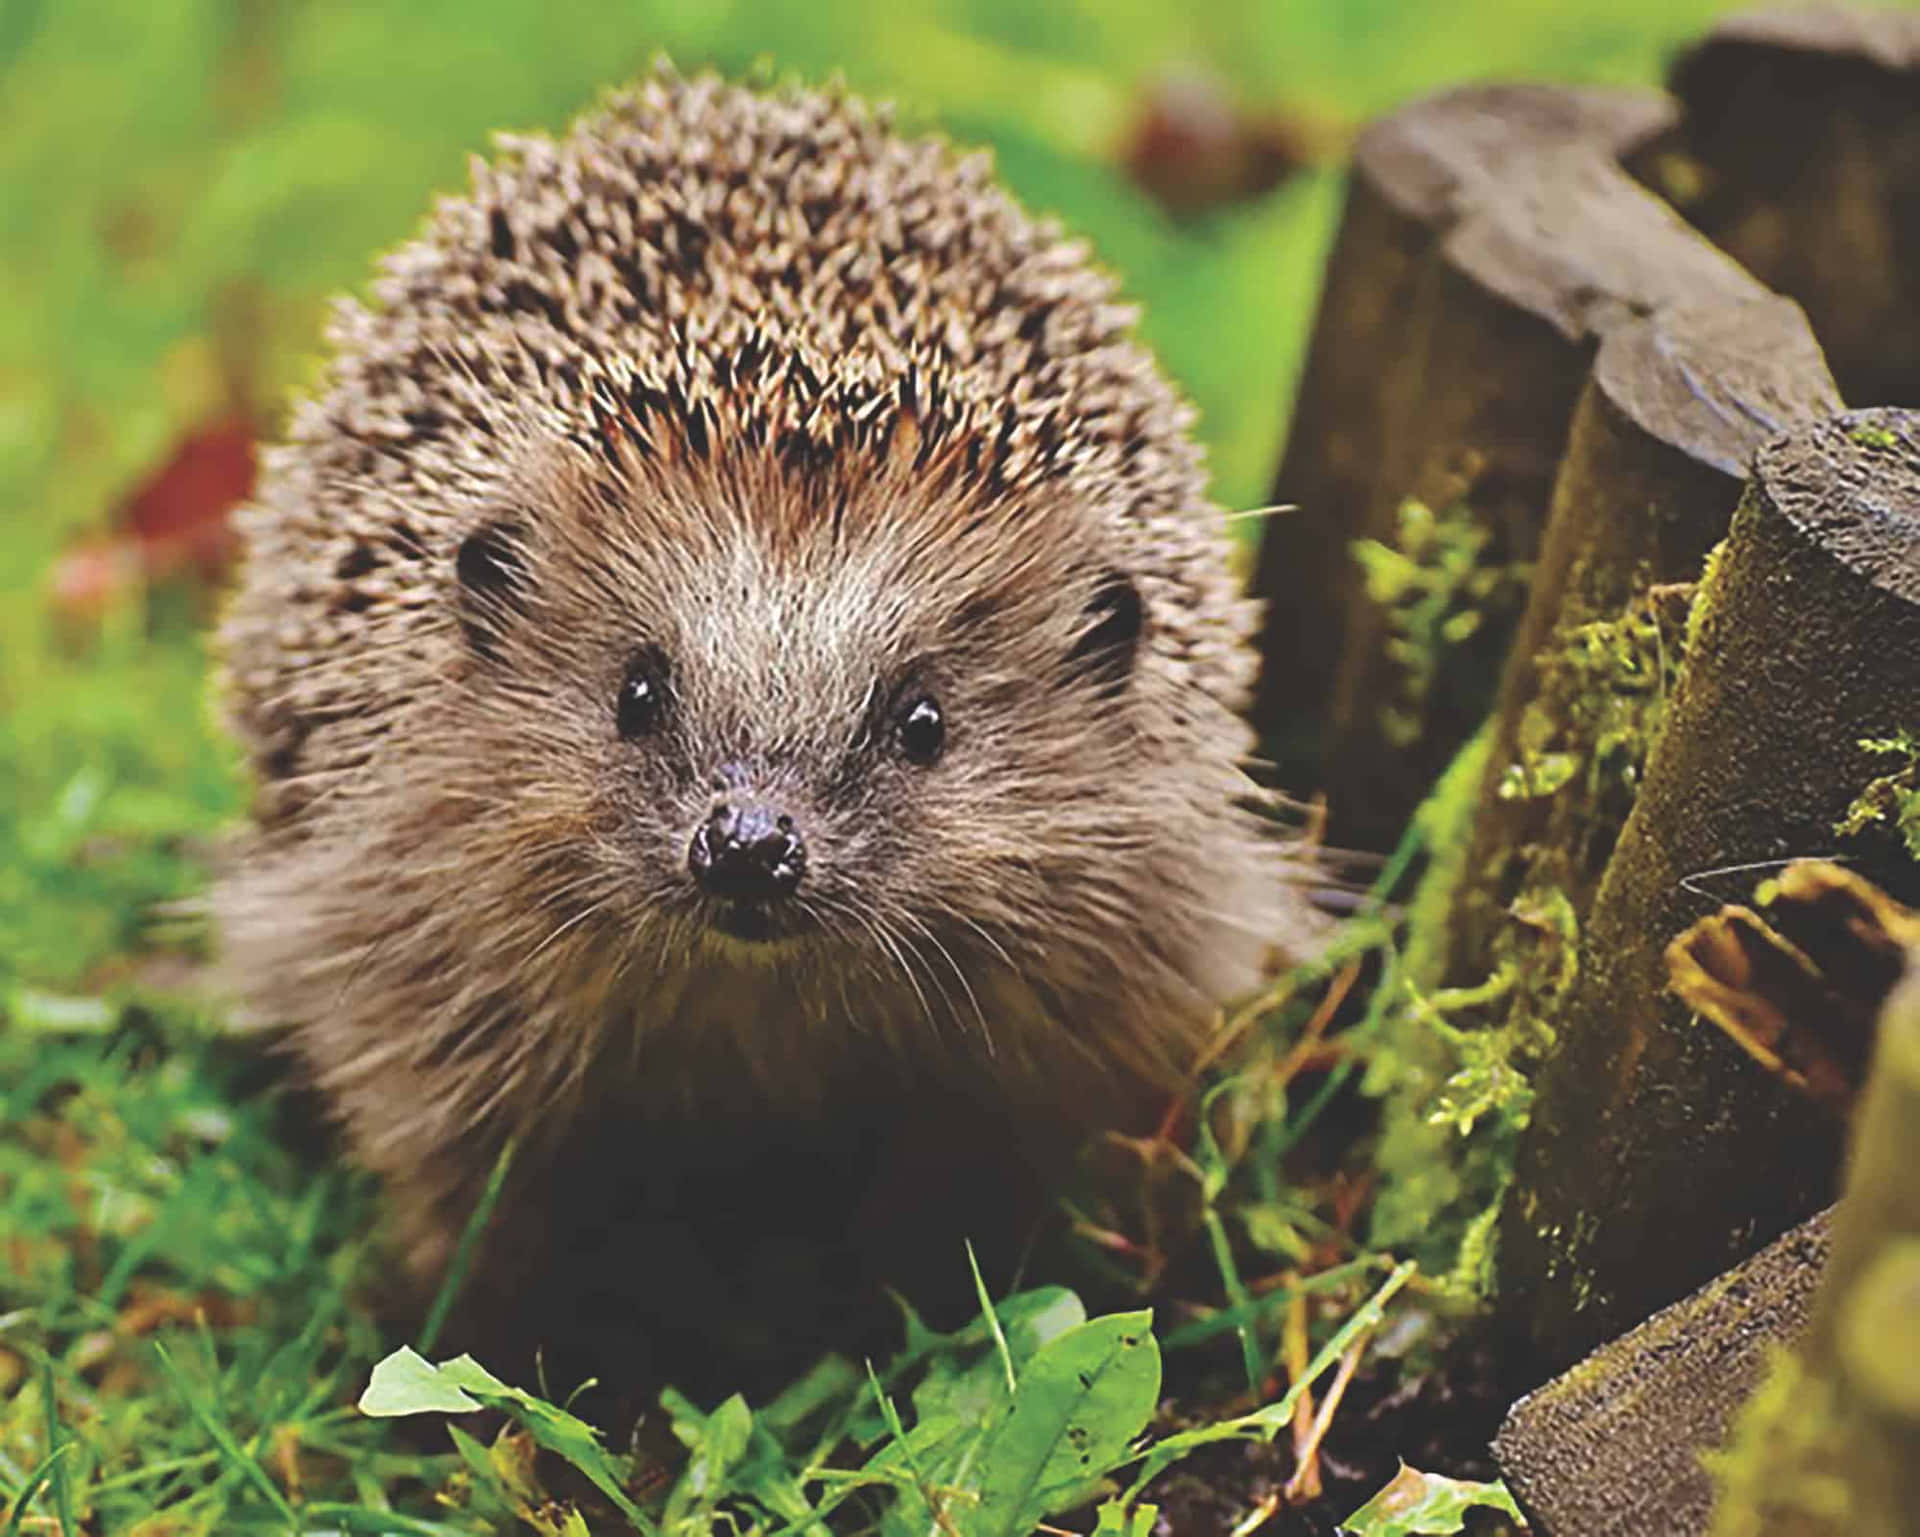 Cute Hedgehog On Grass And Wooden Fence Picture